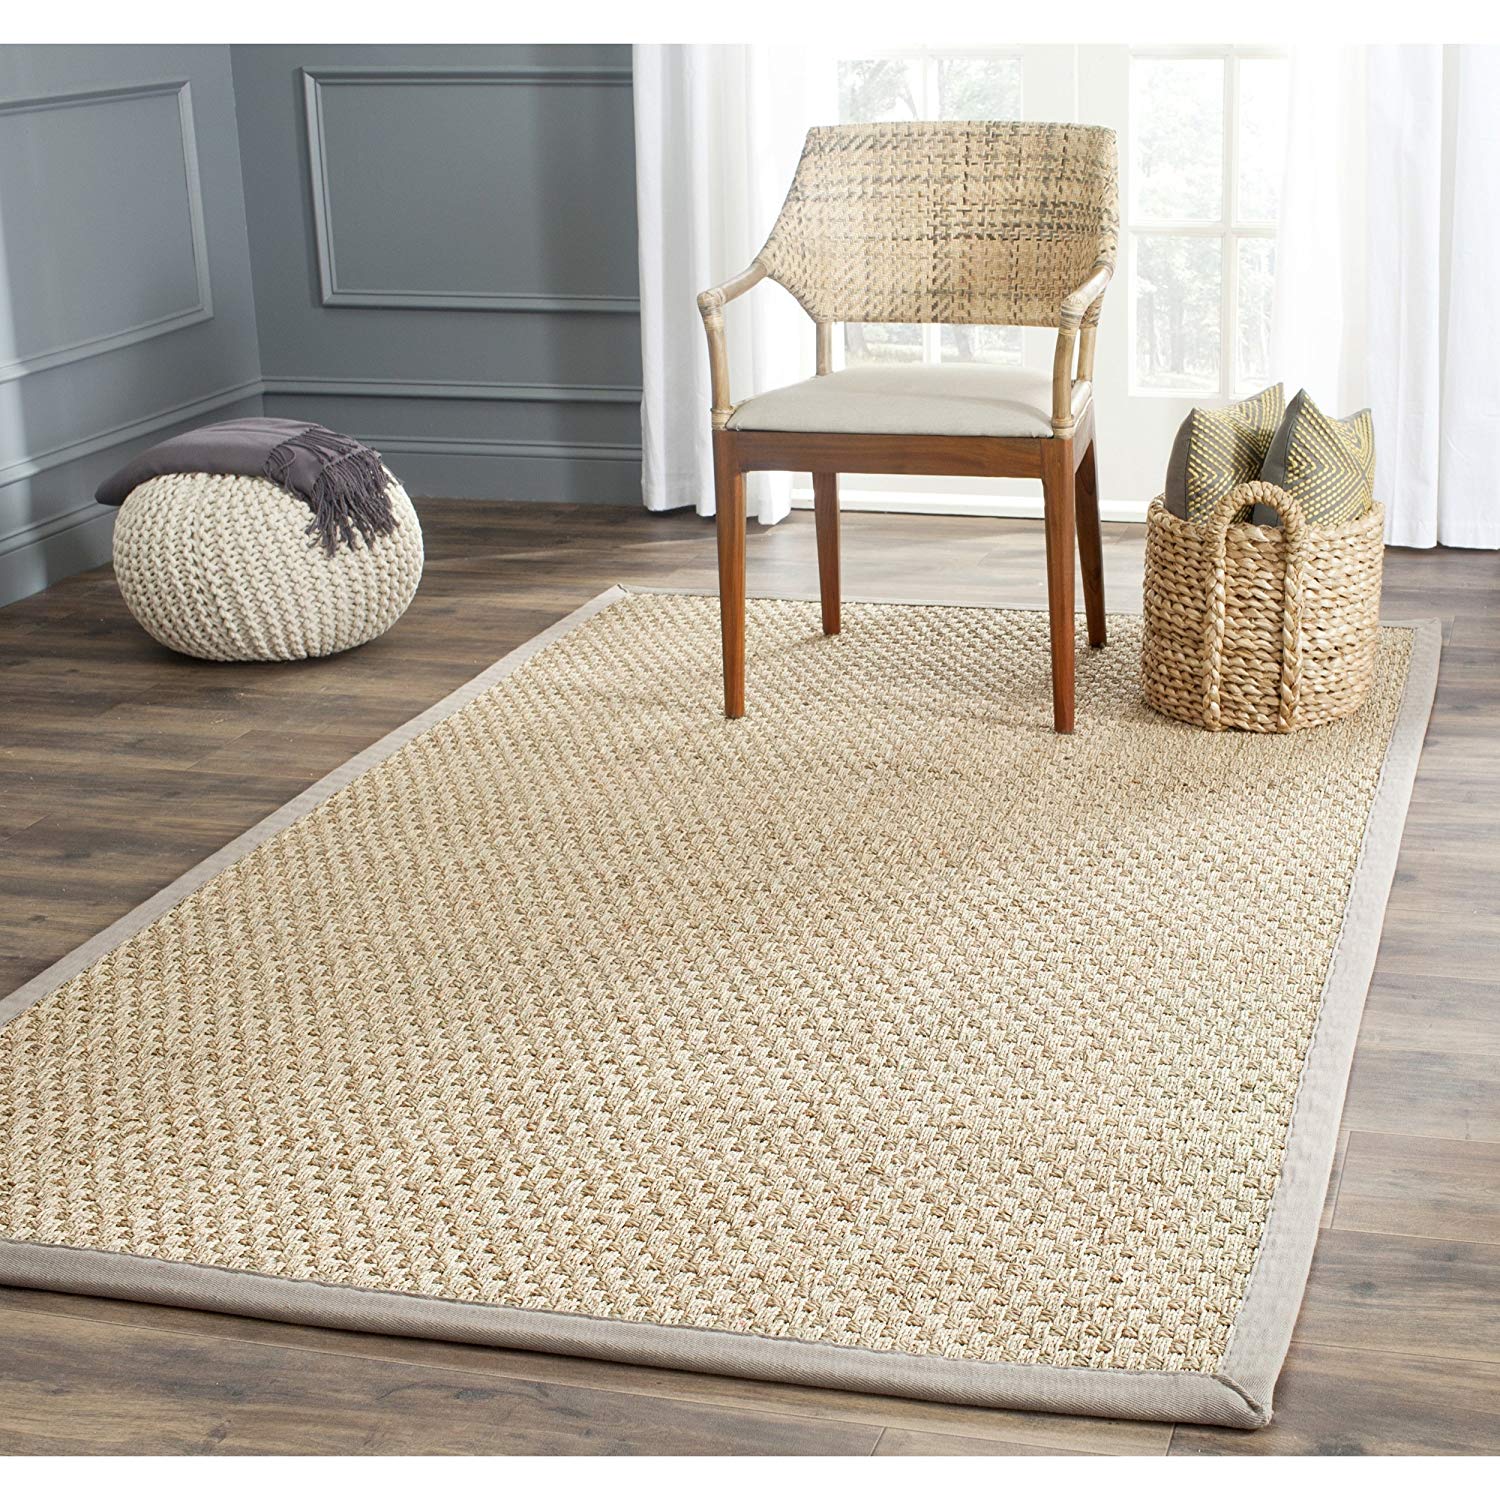 seagrass rugs amazon.com: safavieh natural fiber collection nf114p basketweave natural  and grey summer seagrass VDQBODY